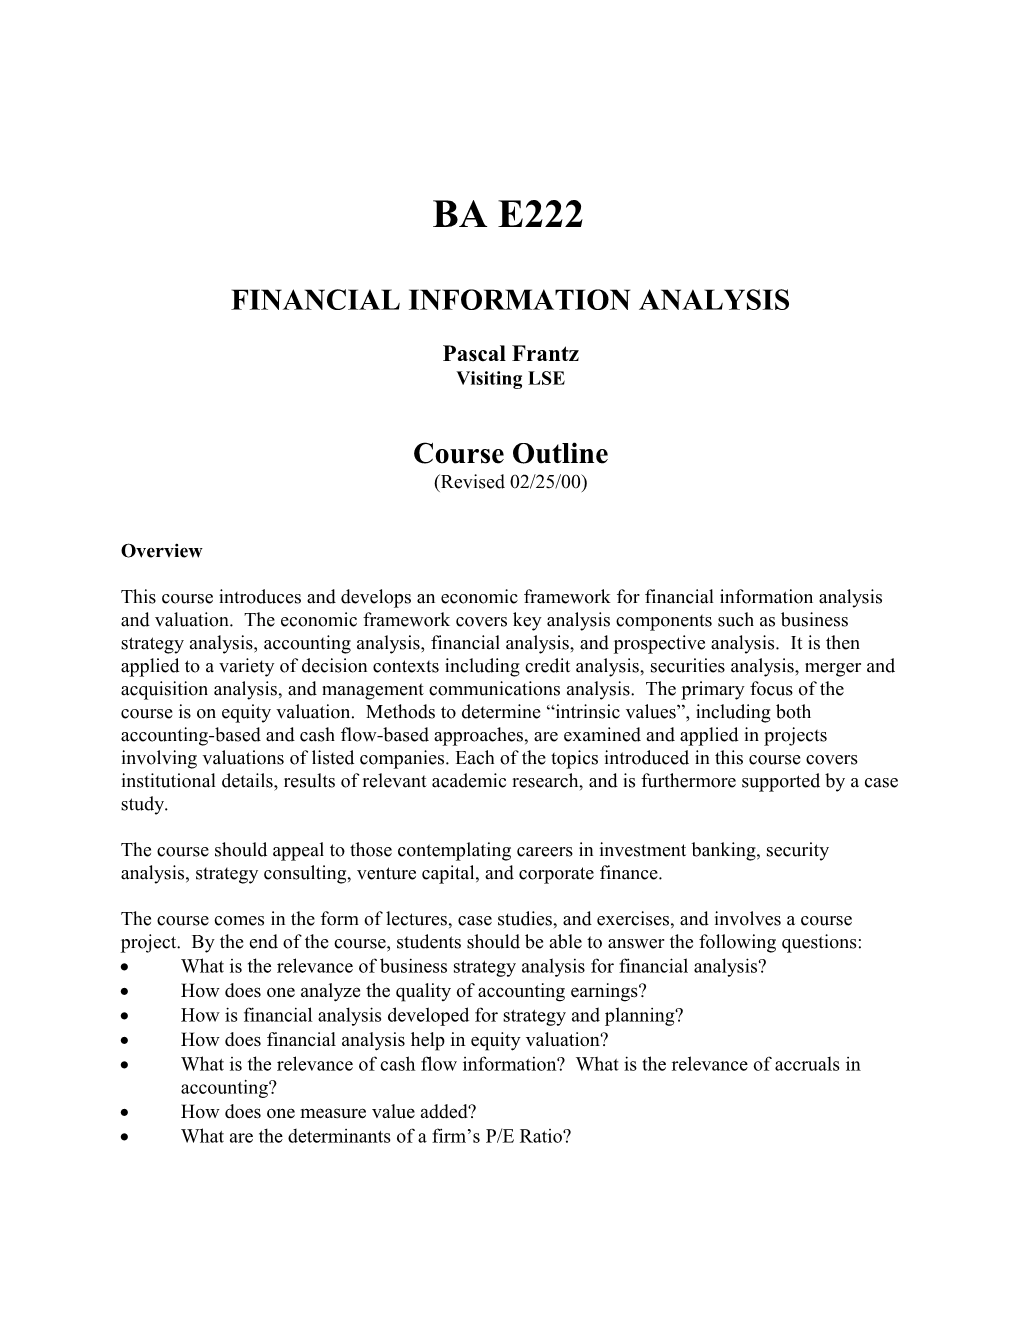 Financial Information Analysis s1